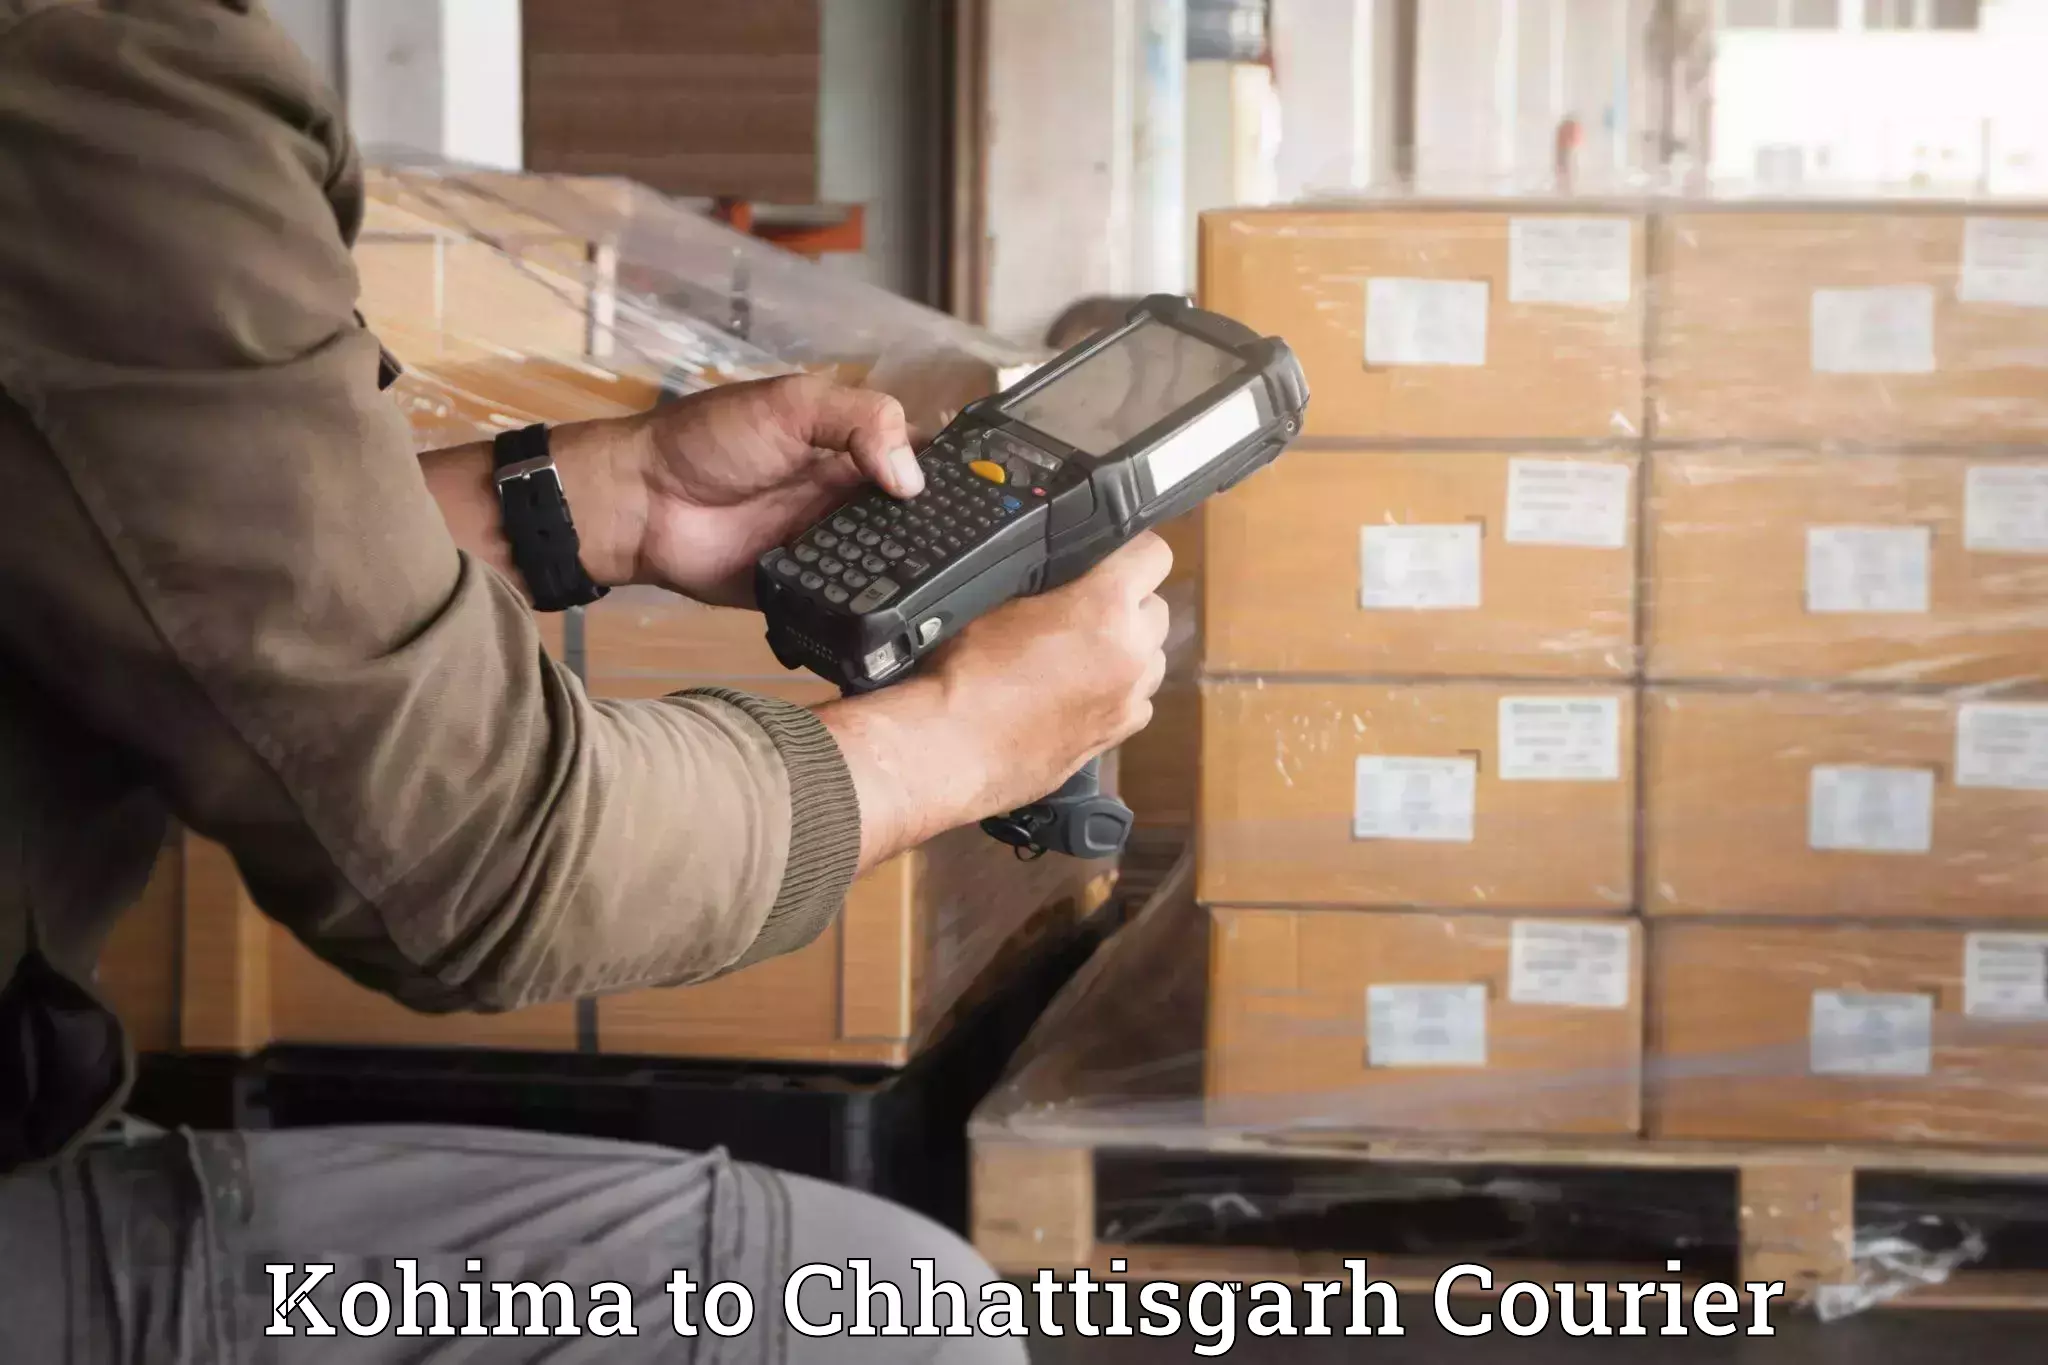 Moving and storage services in Kohima to Patna Chhattisgarh